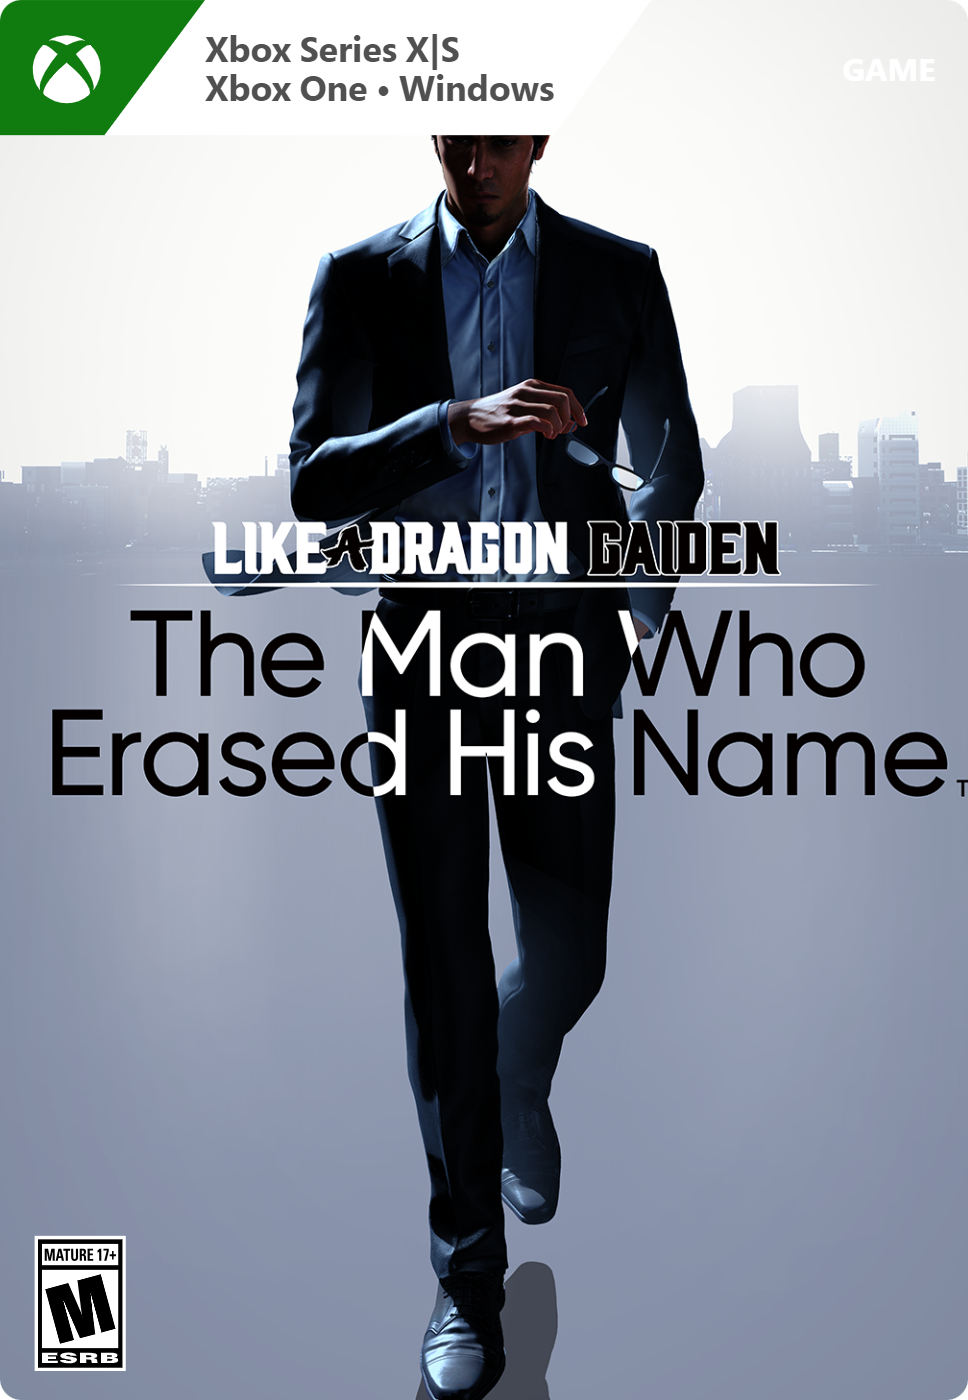 Like a Dragon Gaiden: The Man Who Erased His Name on Steam